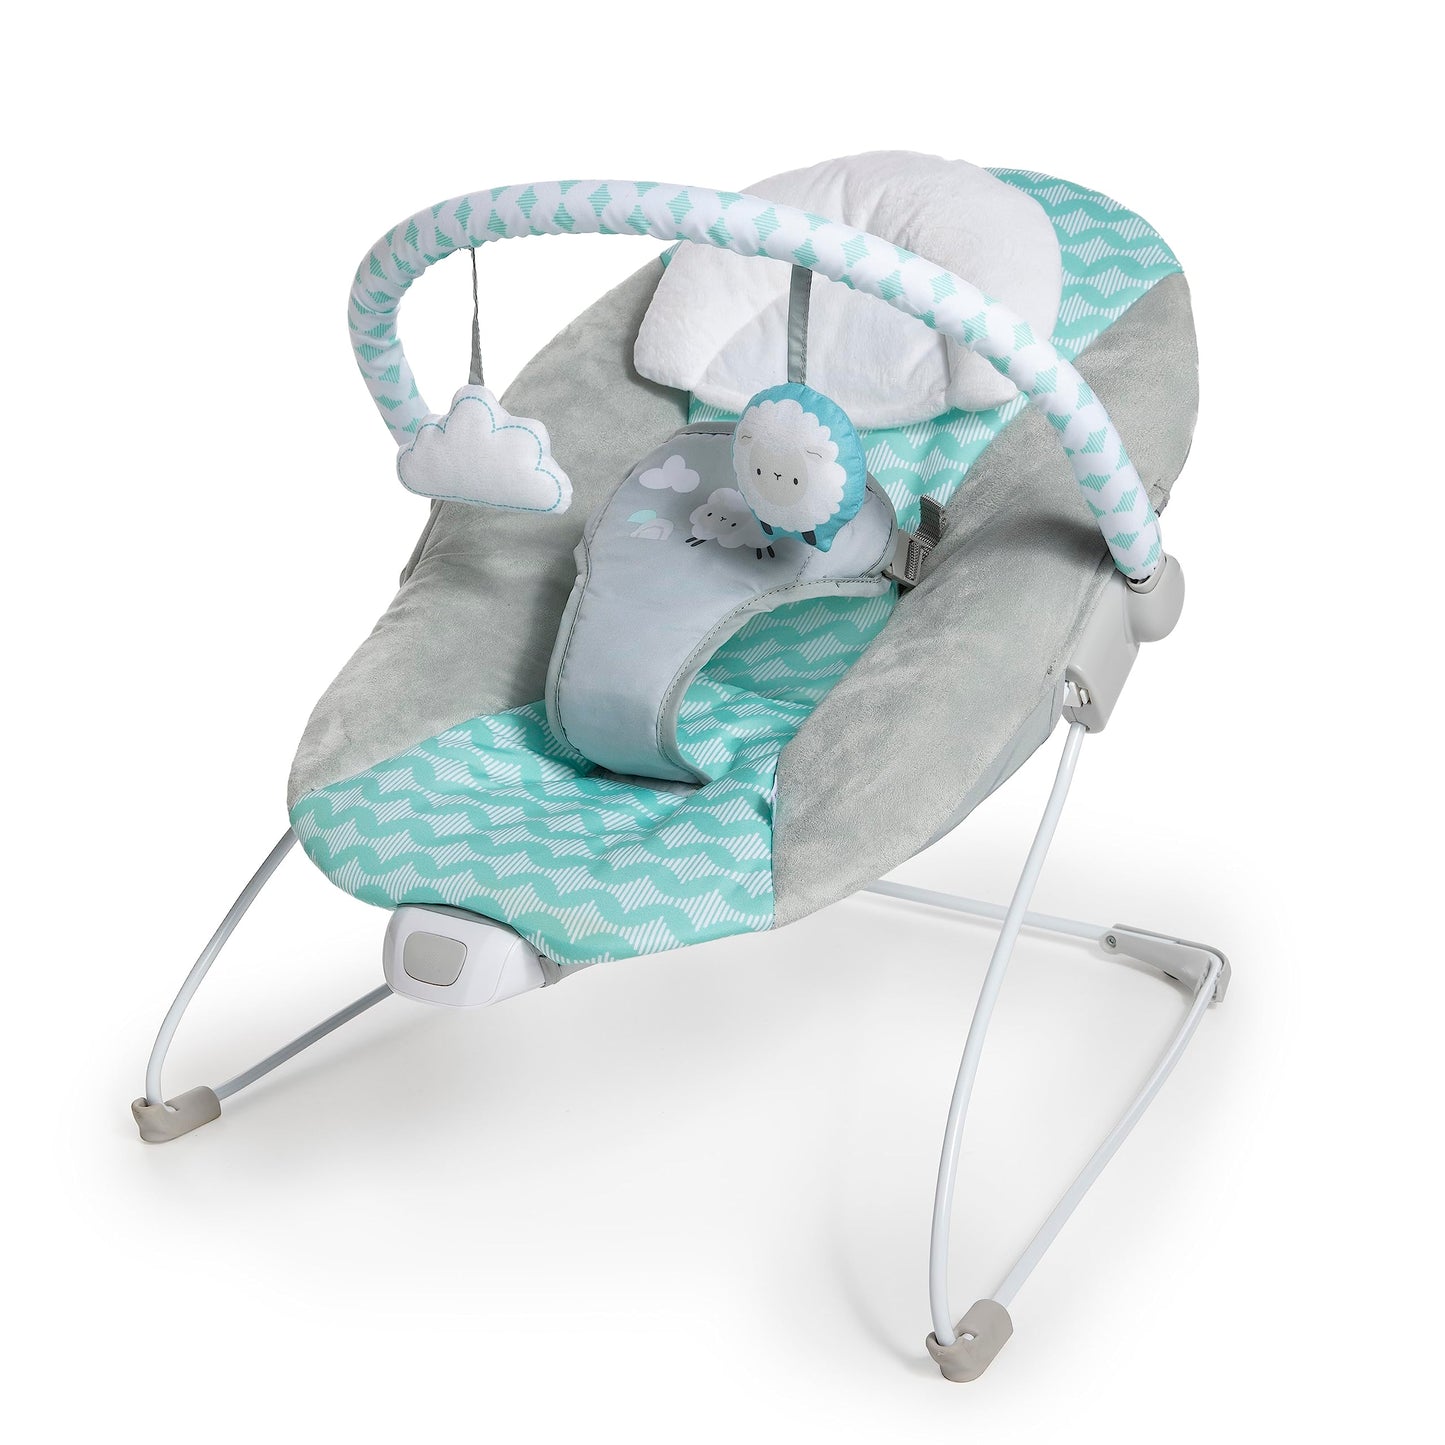 Ingenuity Bouncity Bounce Deluxe Bouncer, Portable Bouncing Baby Seat with Overhead Mobile, and Calming Vibration